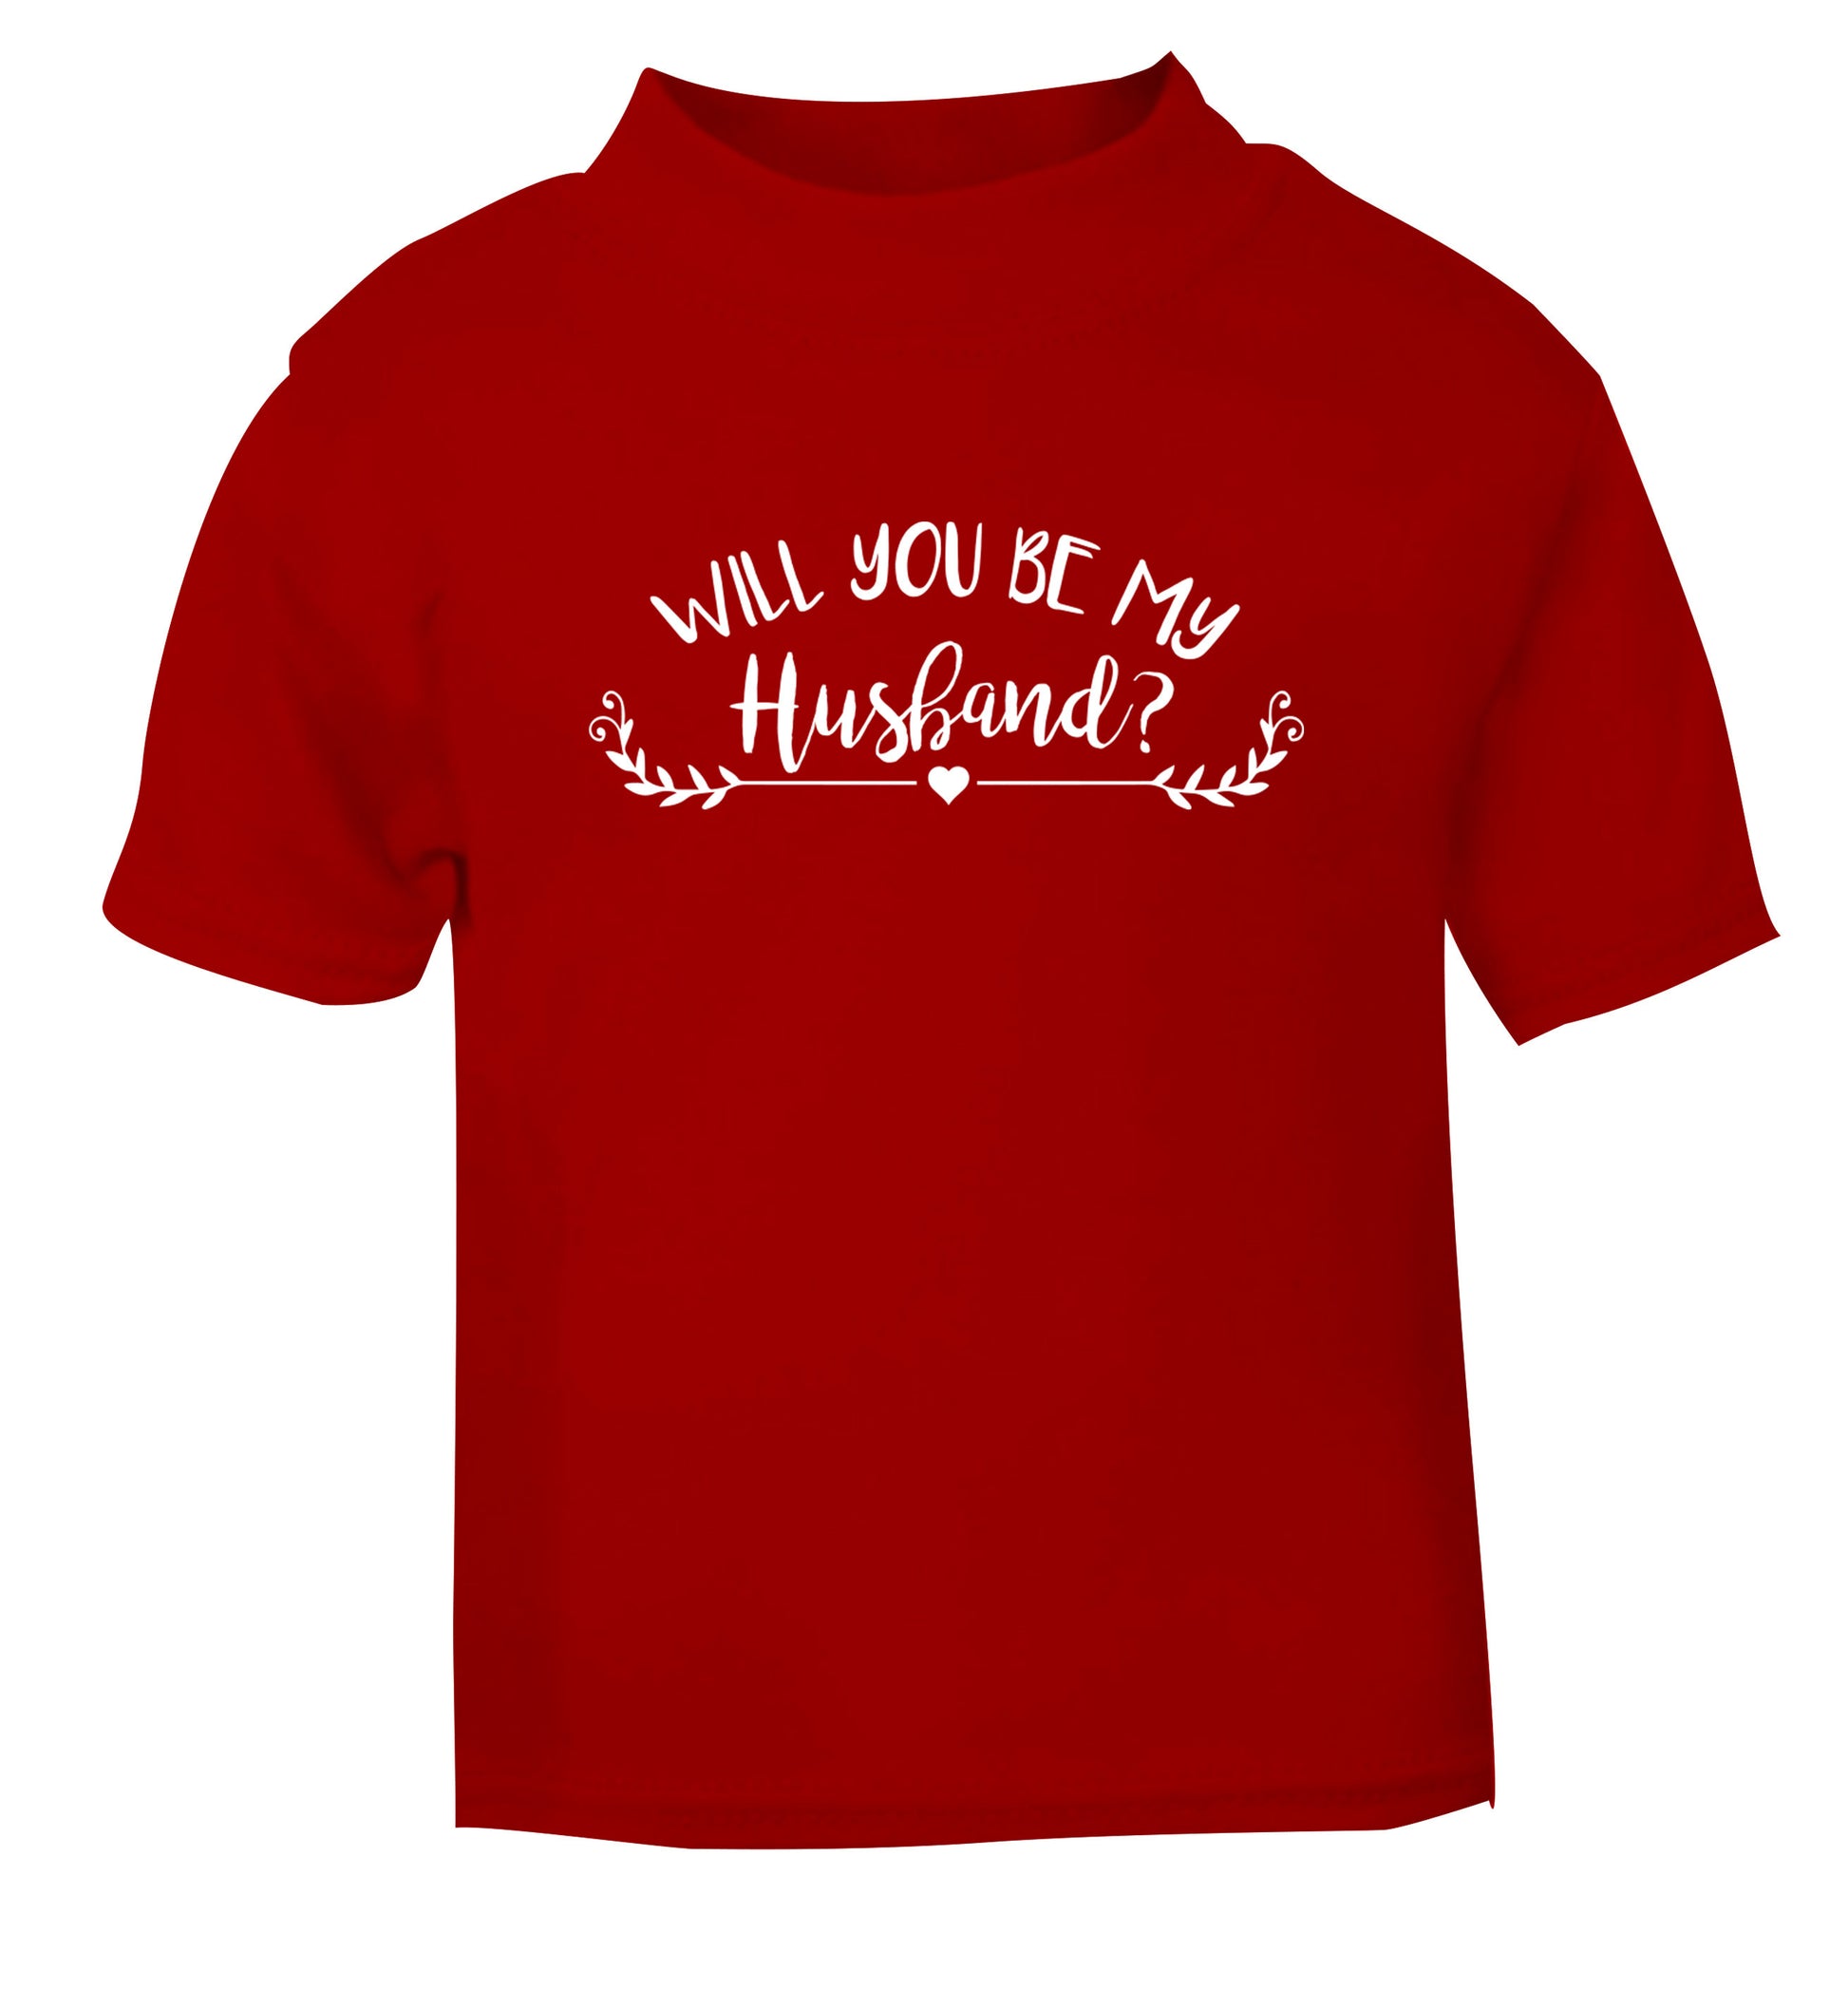 Will you be my husband? red Baby Toddler Tshirt 2 Years